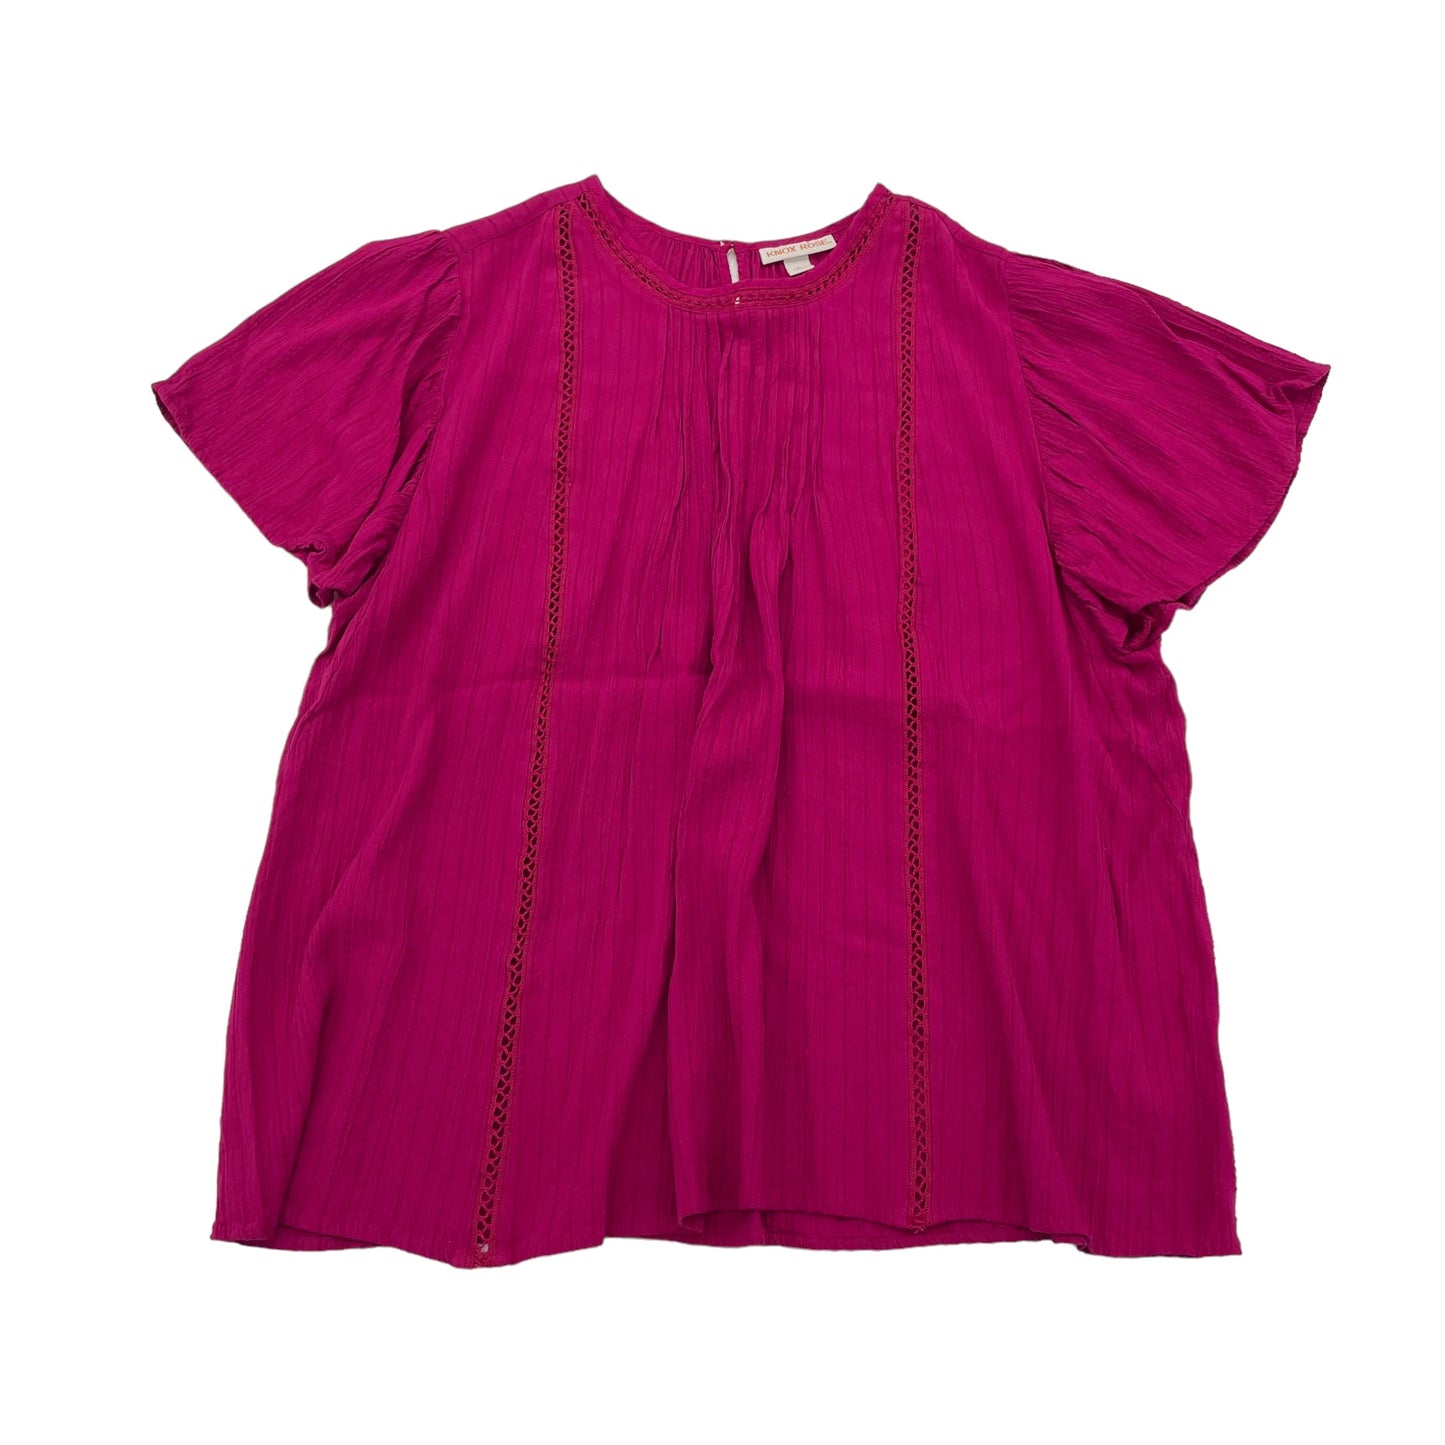 Pink Top Short Sleeve Knox Rose, Size L